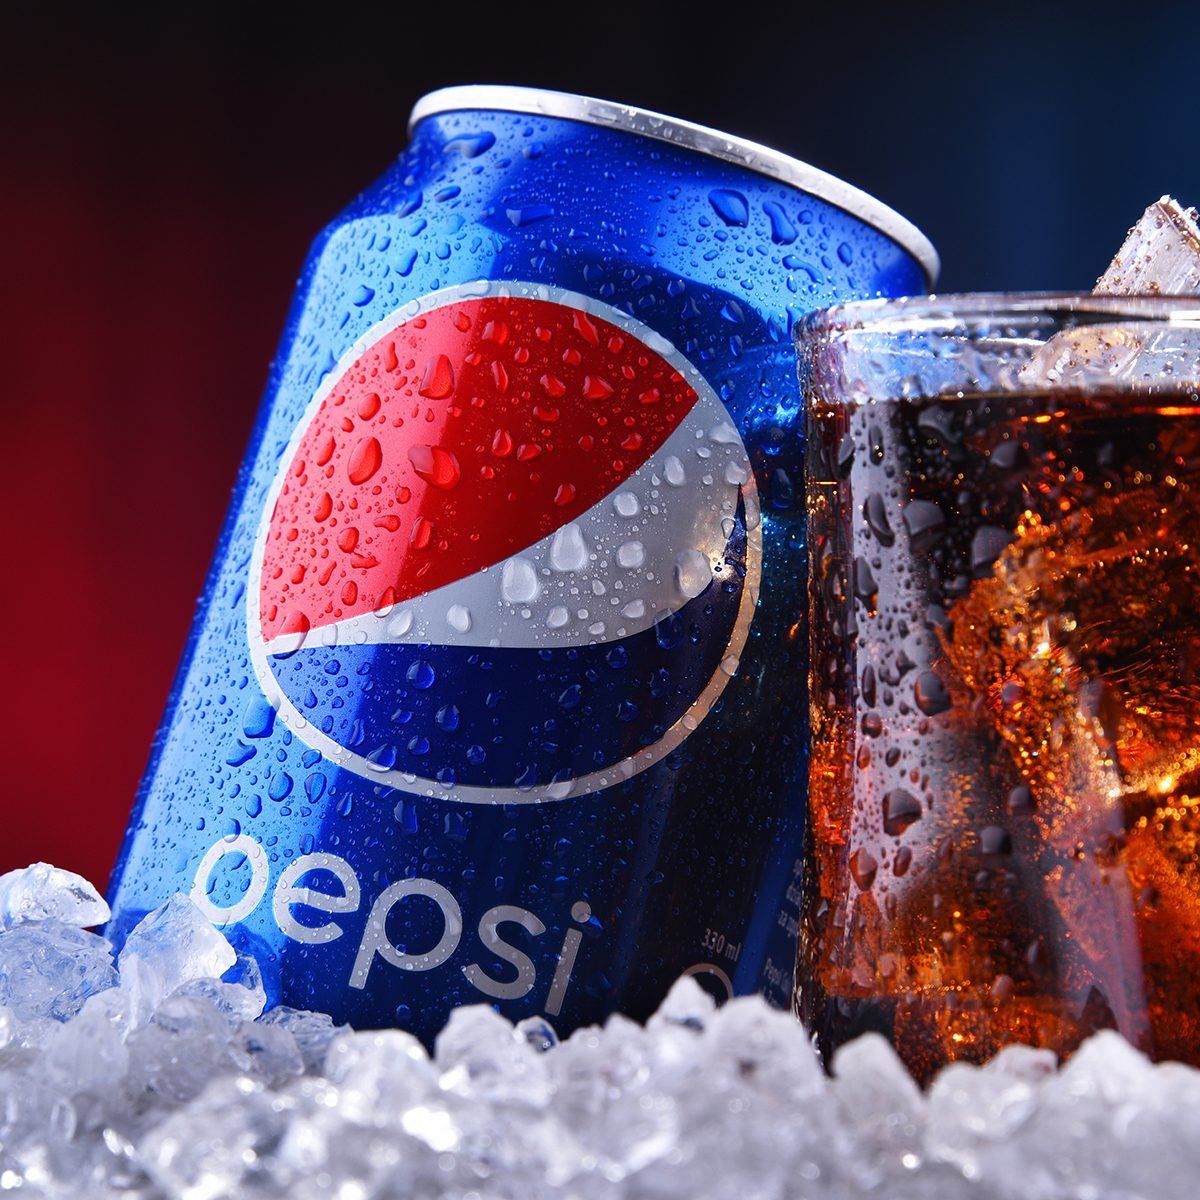 A can and a glass of Pepsi, a carbonated soft drink produced and manufactured by PepsiCo.